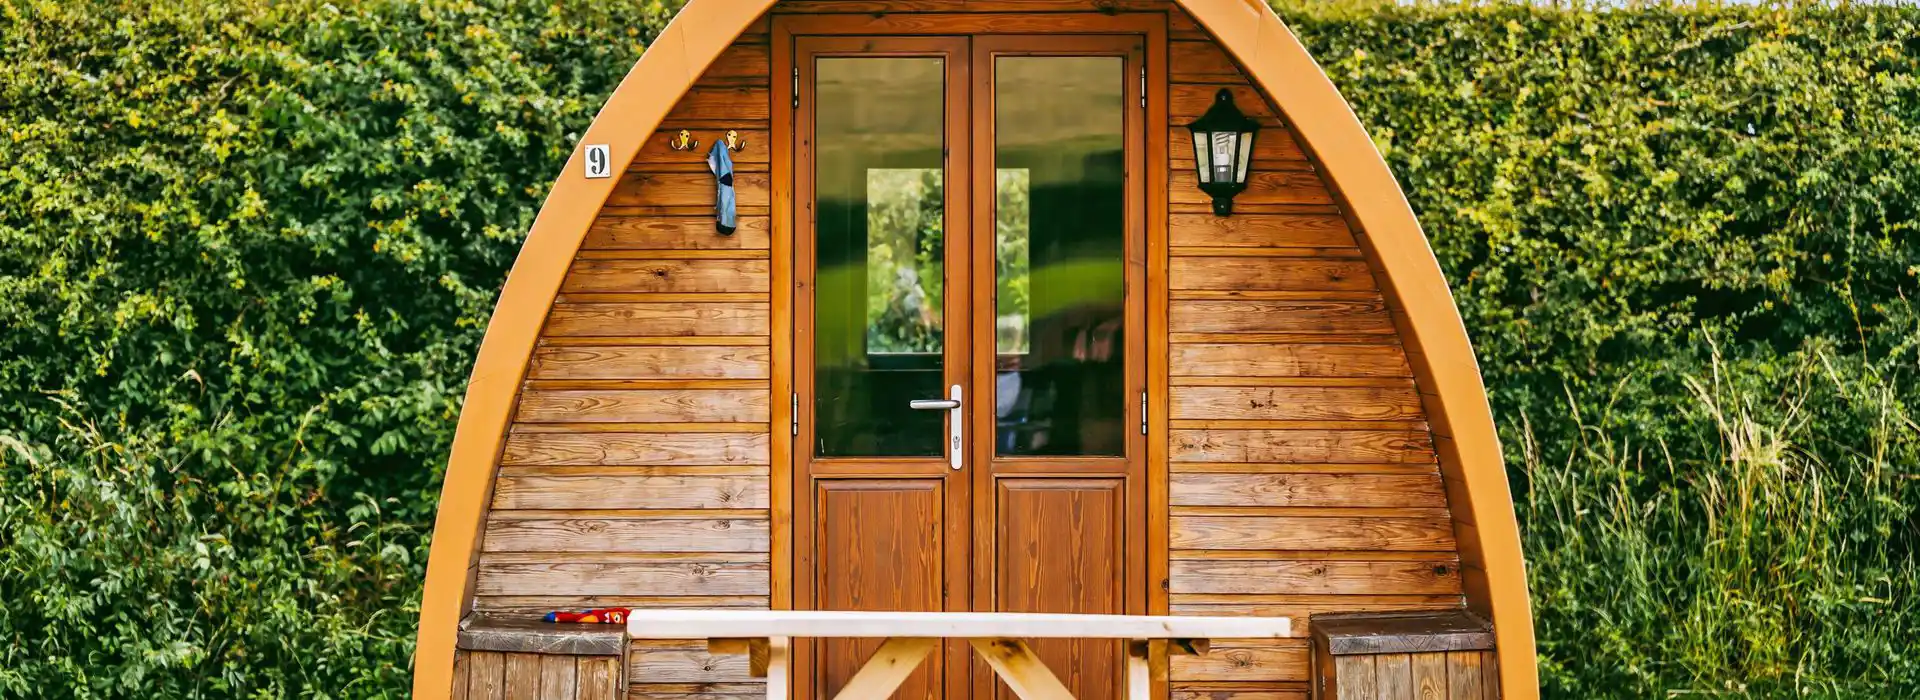 Camping and glamping pods in Scarborough